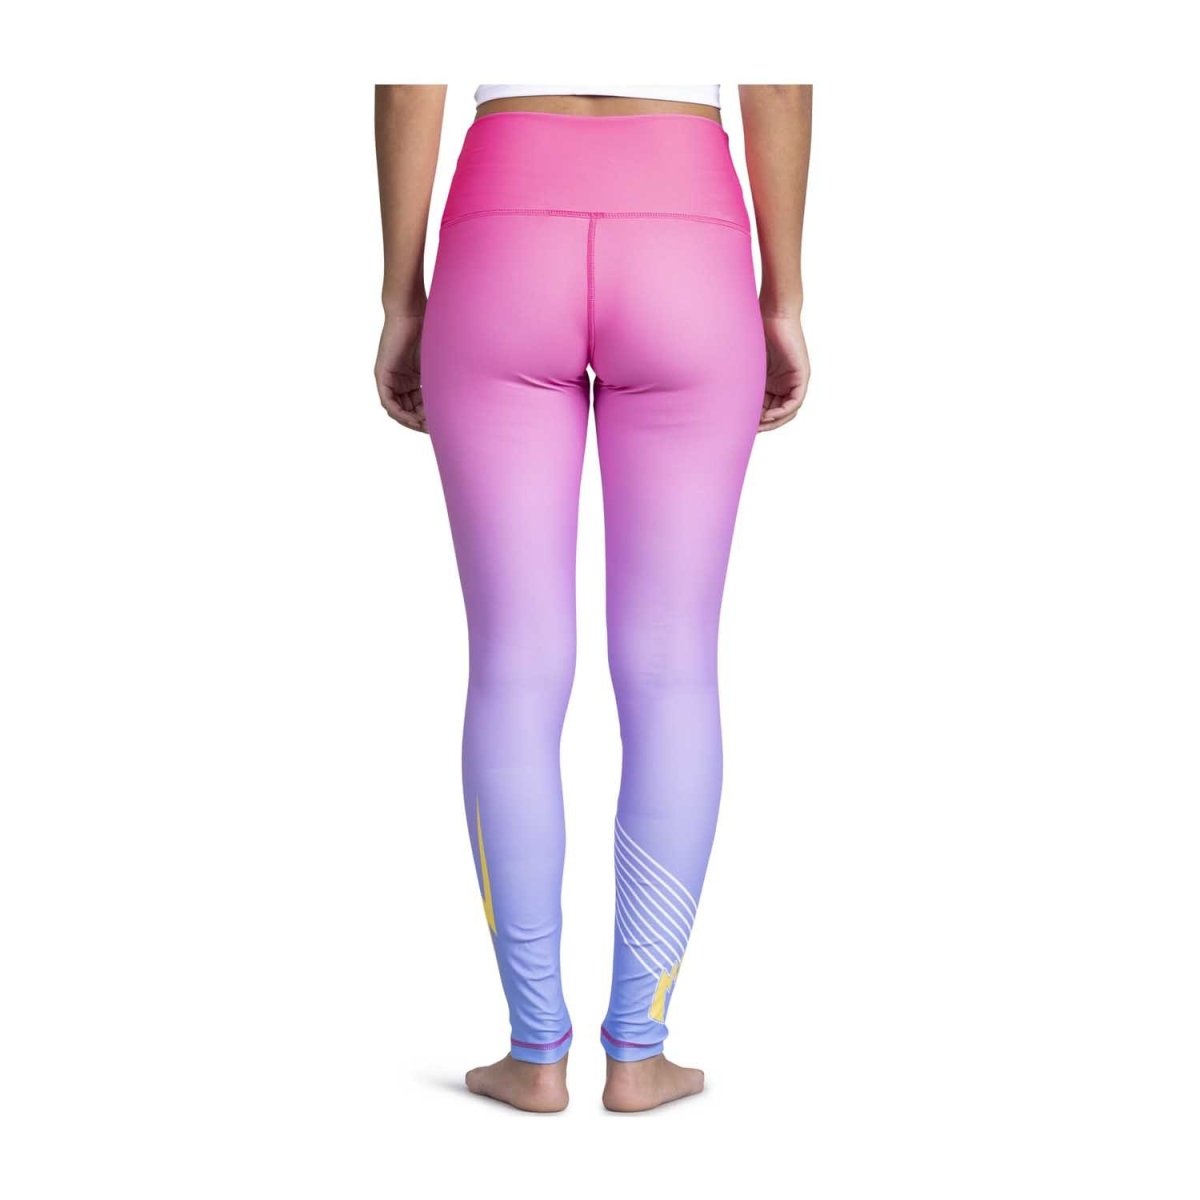 Ombre Pink to Blue Leggings